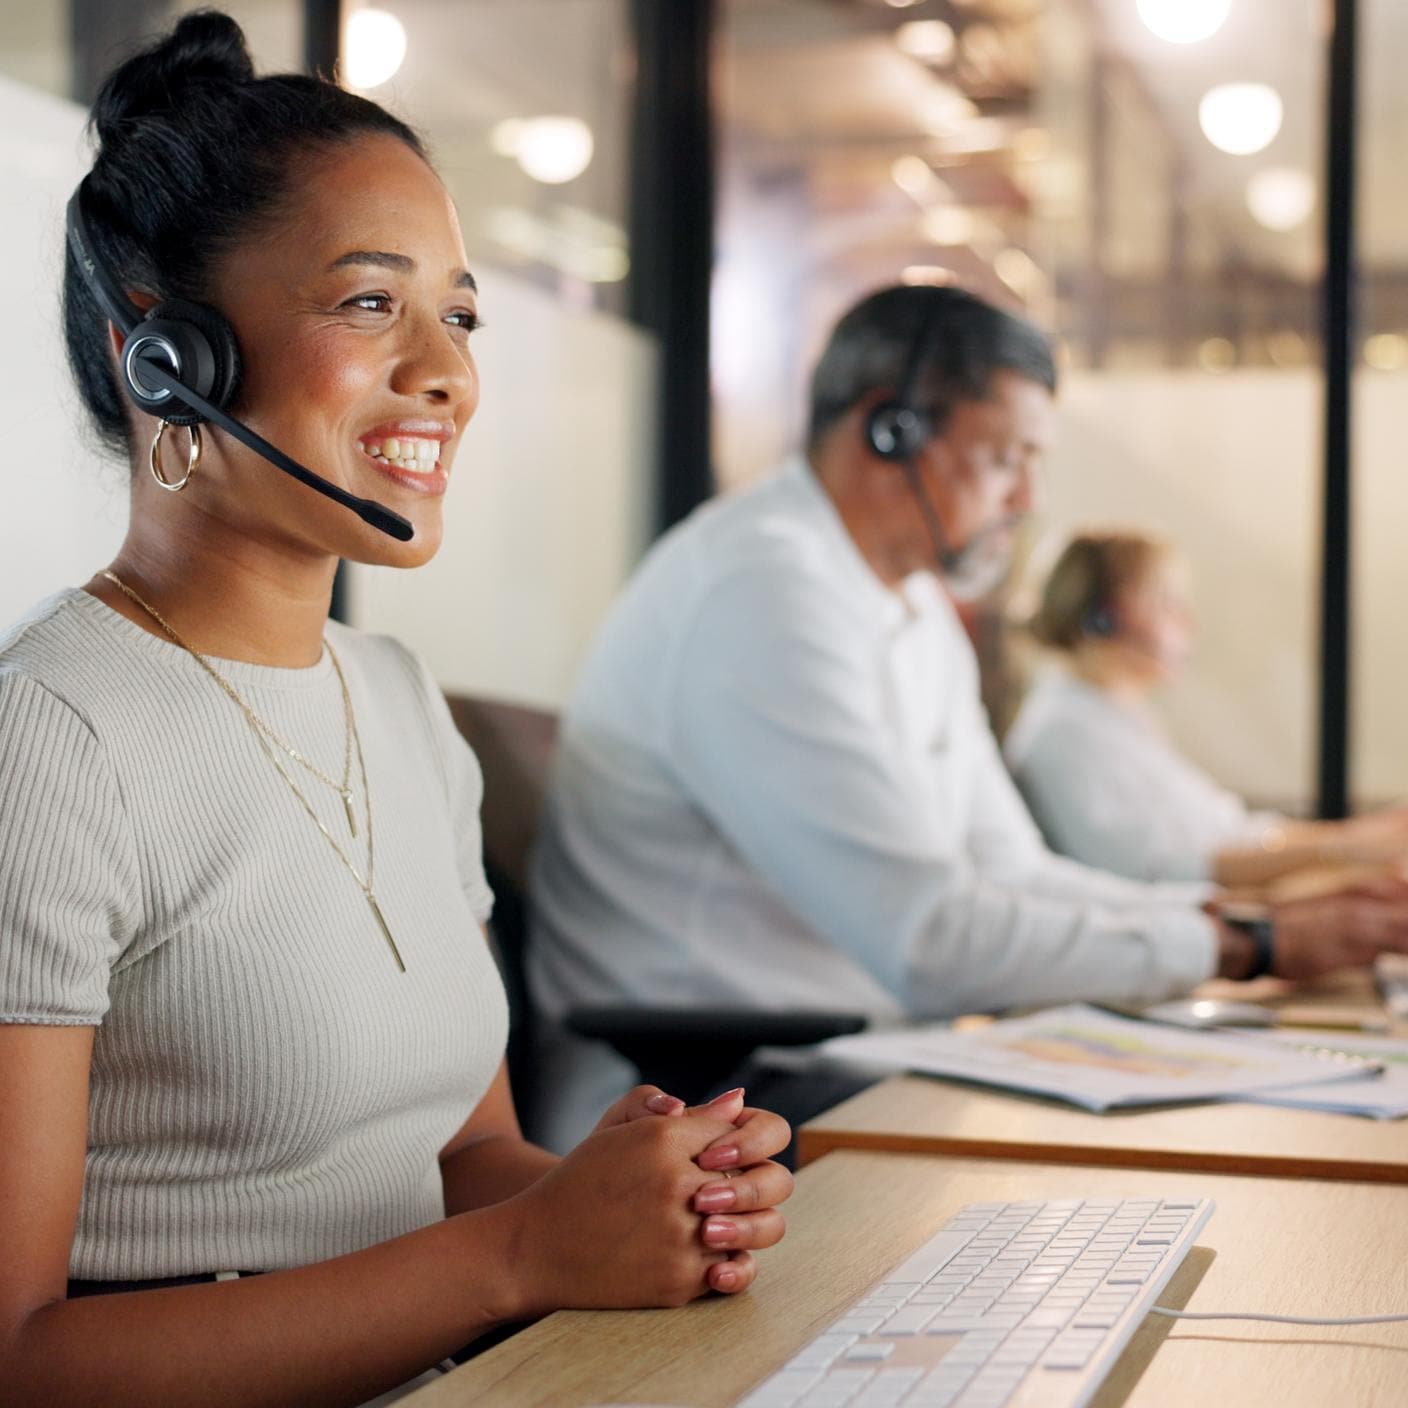 Demonstrate trust and confidence in your high quality customer service with BSI Kitemark™ certification for customer service